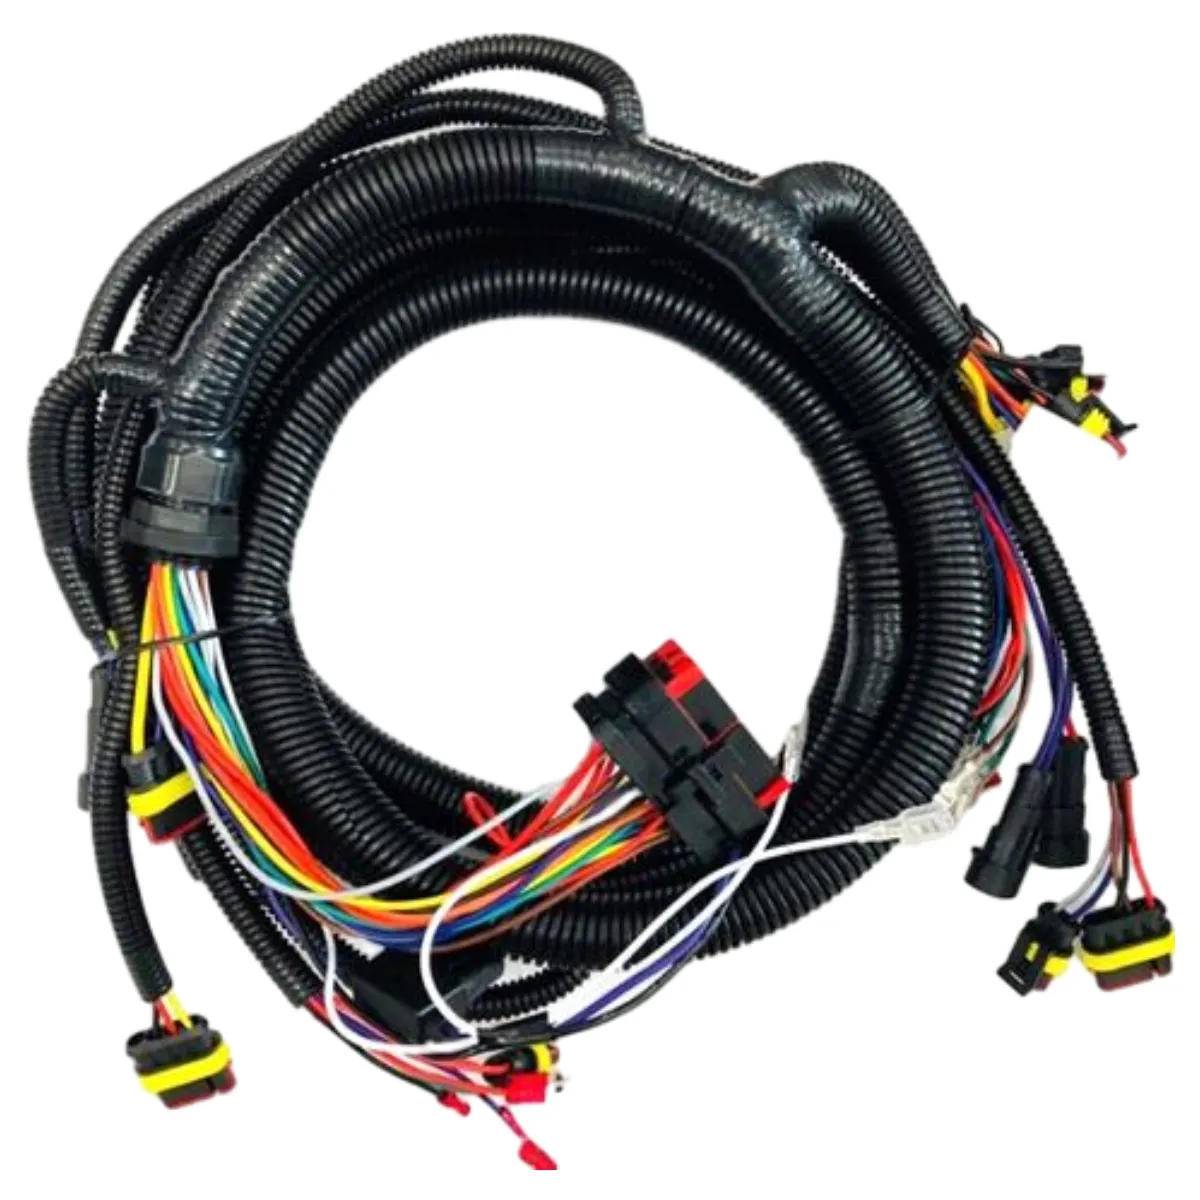 Complete Wiring Harnesses Assembly Cable Automotive Wire Harness OEM Customized Cable Assembly With Terminal Connector,FFC Cable